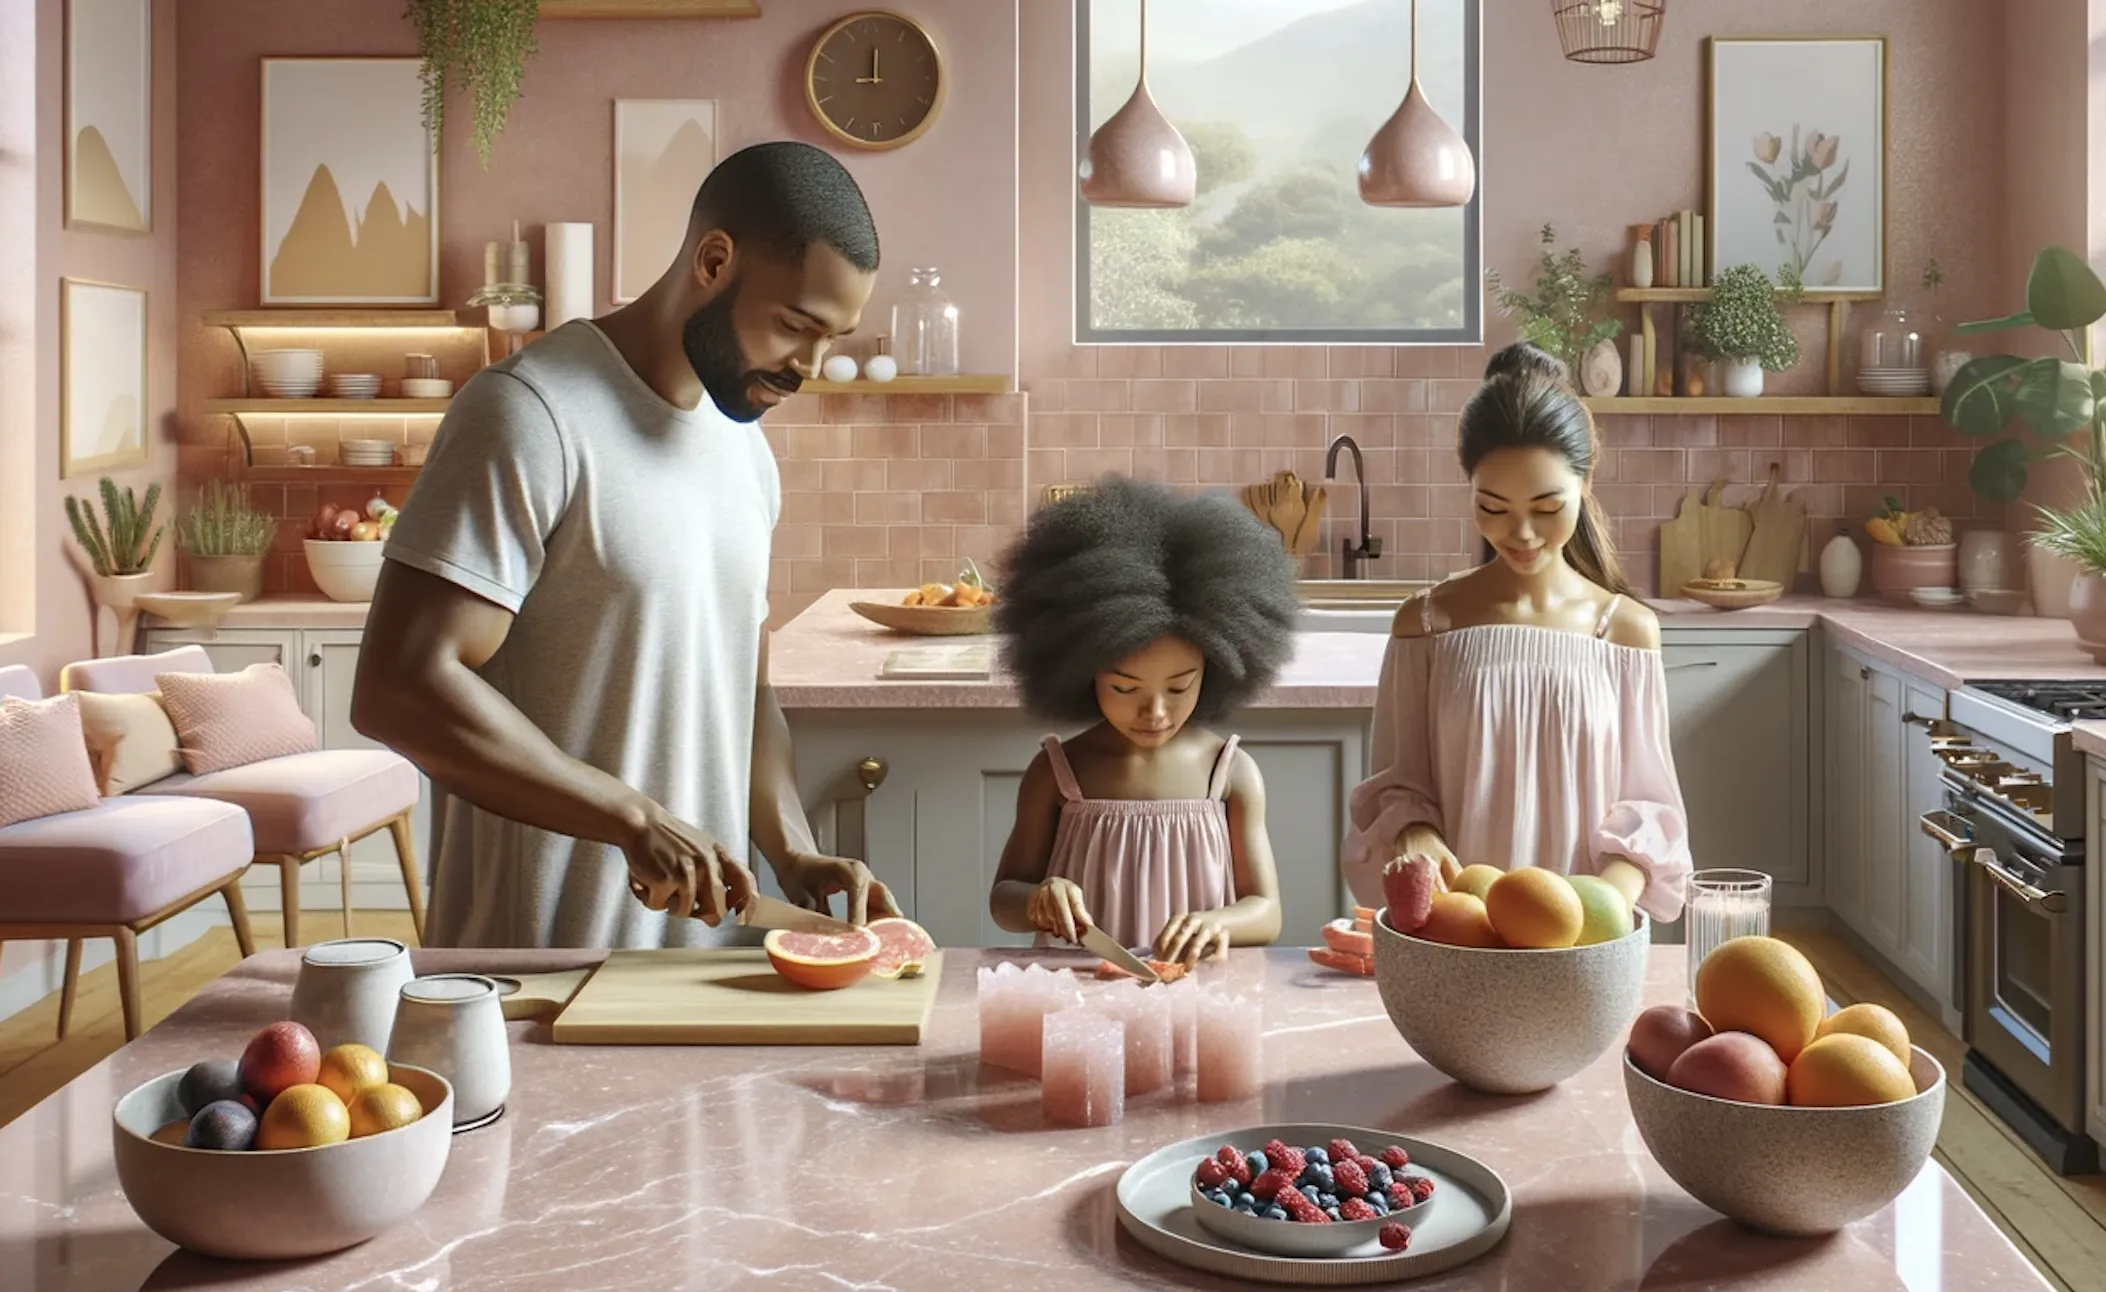 photo showing a family using a kitchen and multiple rose quartz items